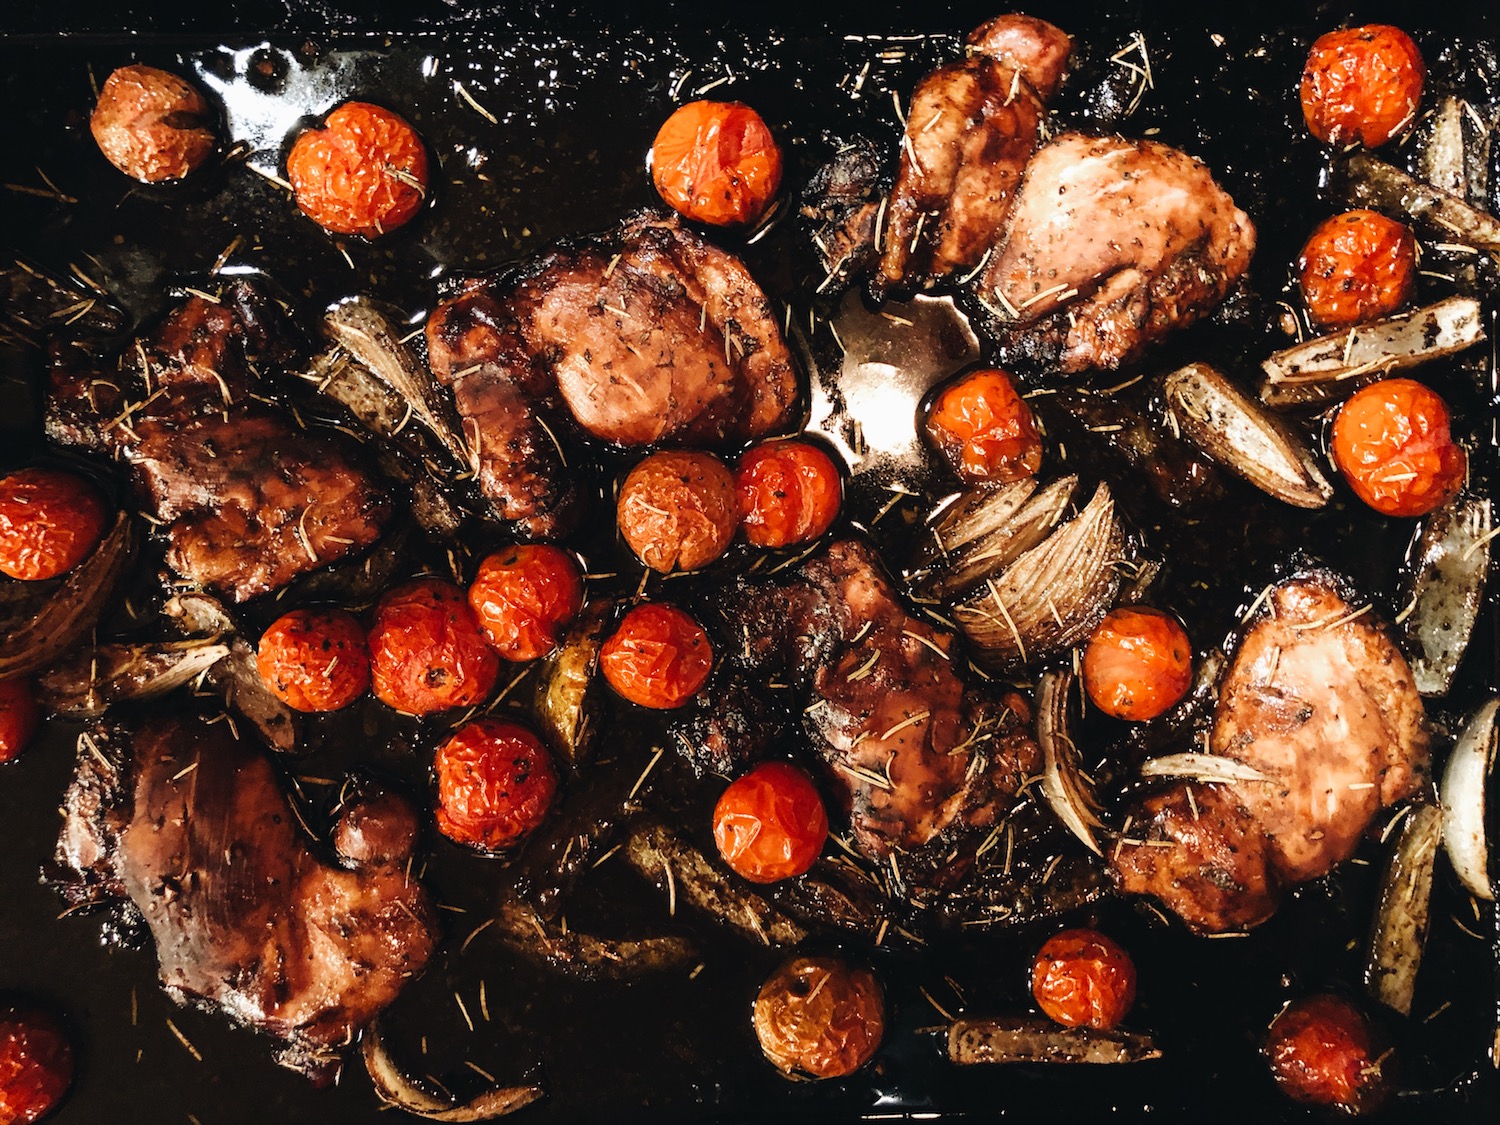 Sheet pan dinners are easy and delicious, like this Balsamic Sheet Pan Chicken.